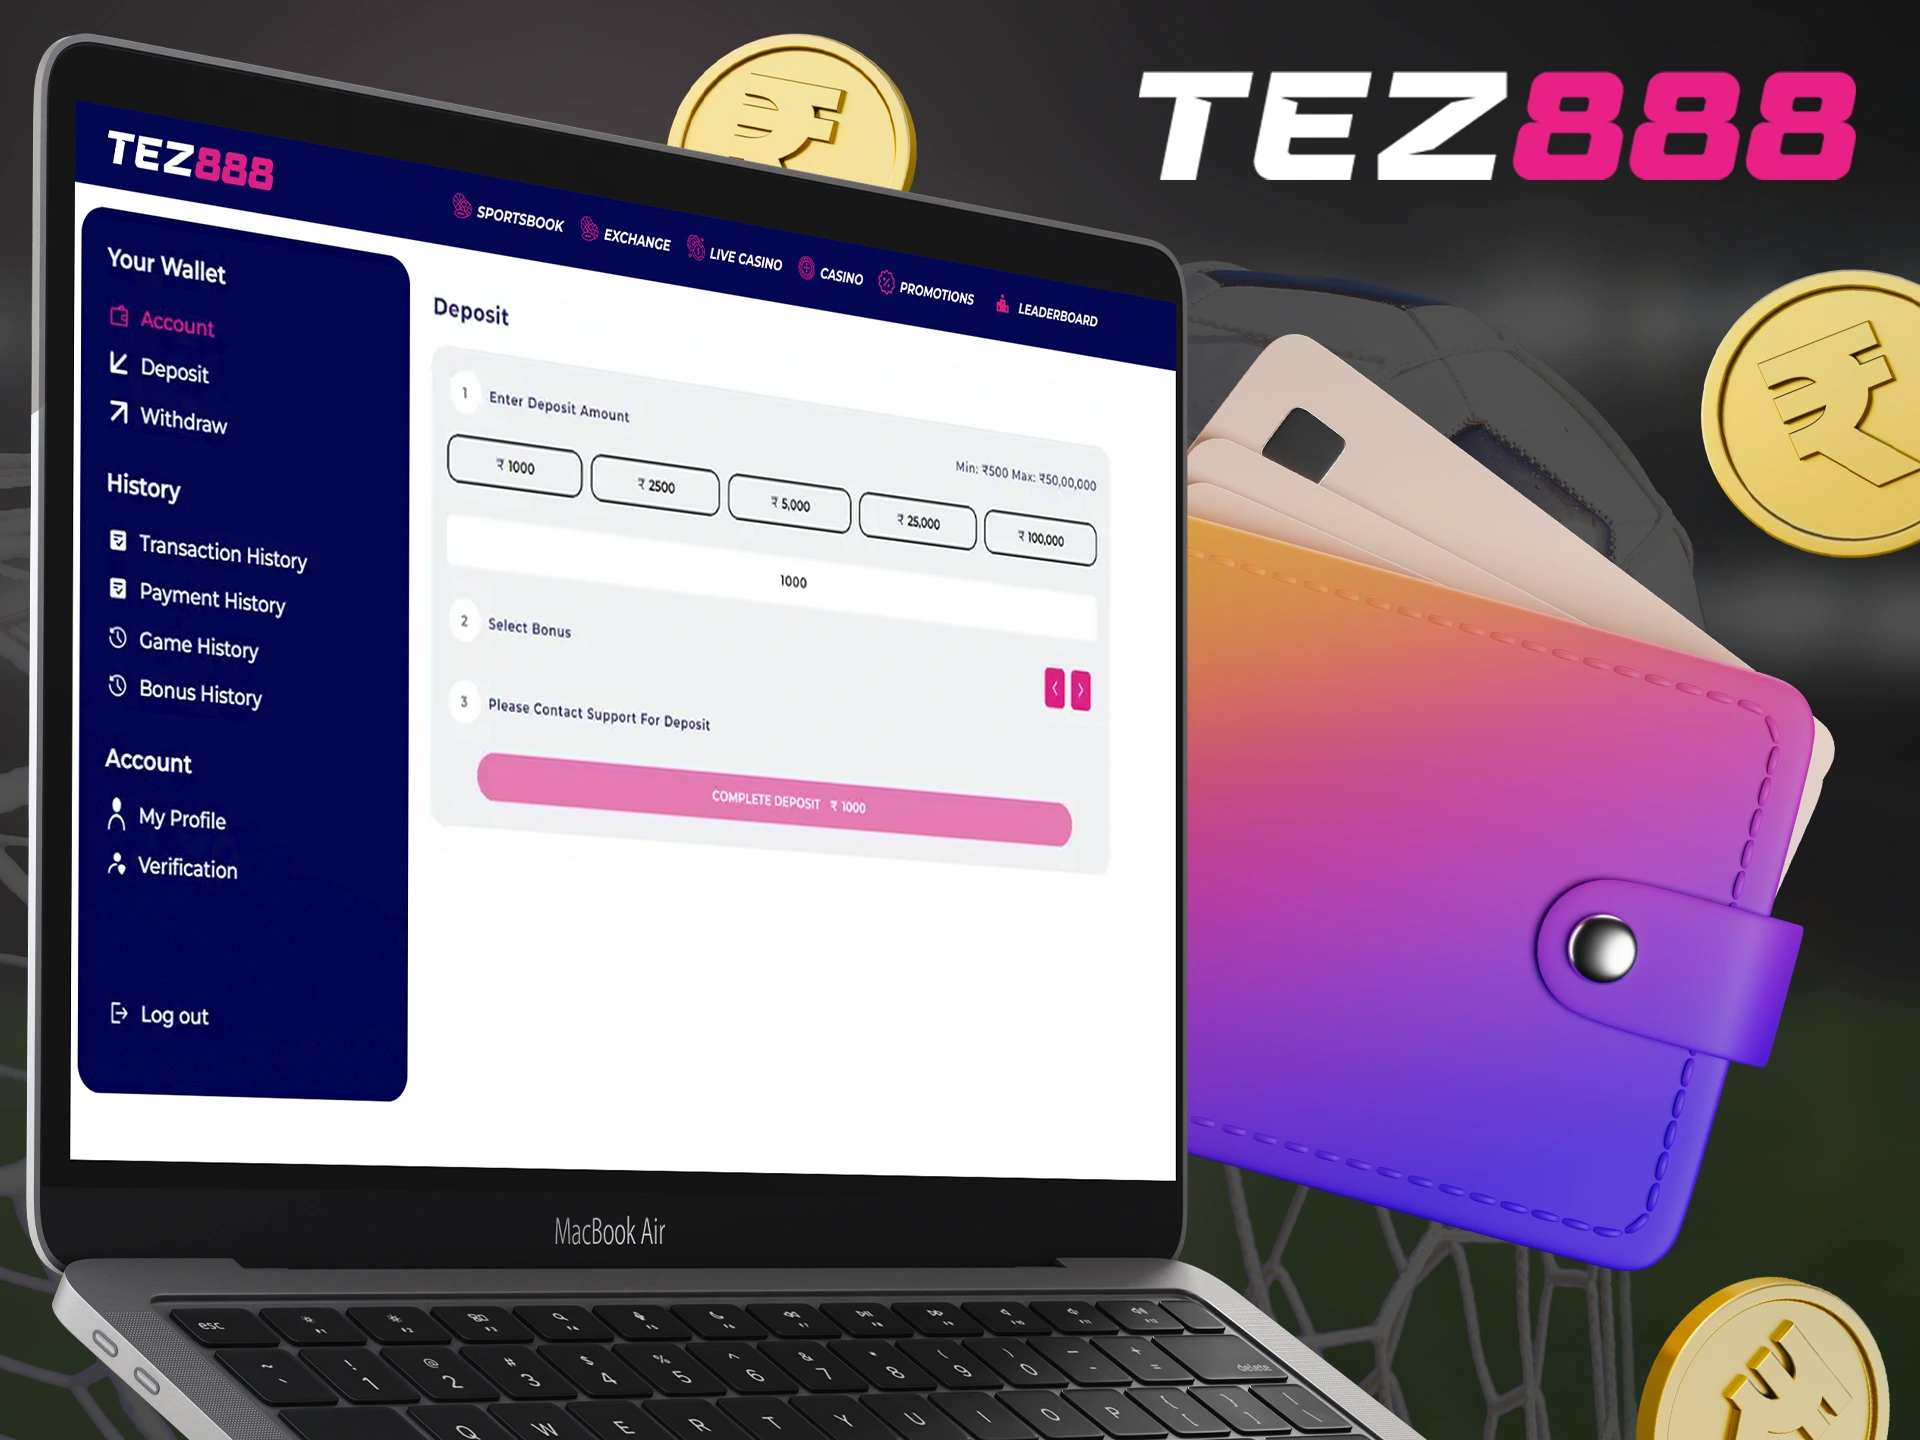 Find out what deposit and withdrawal methods are available at Tez888.